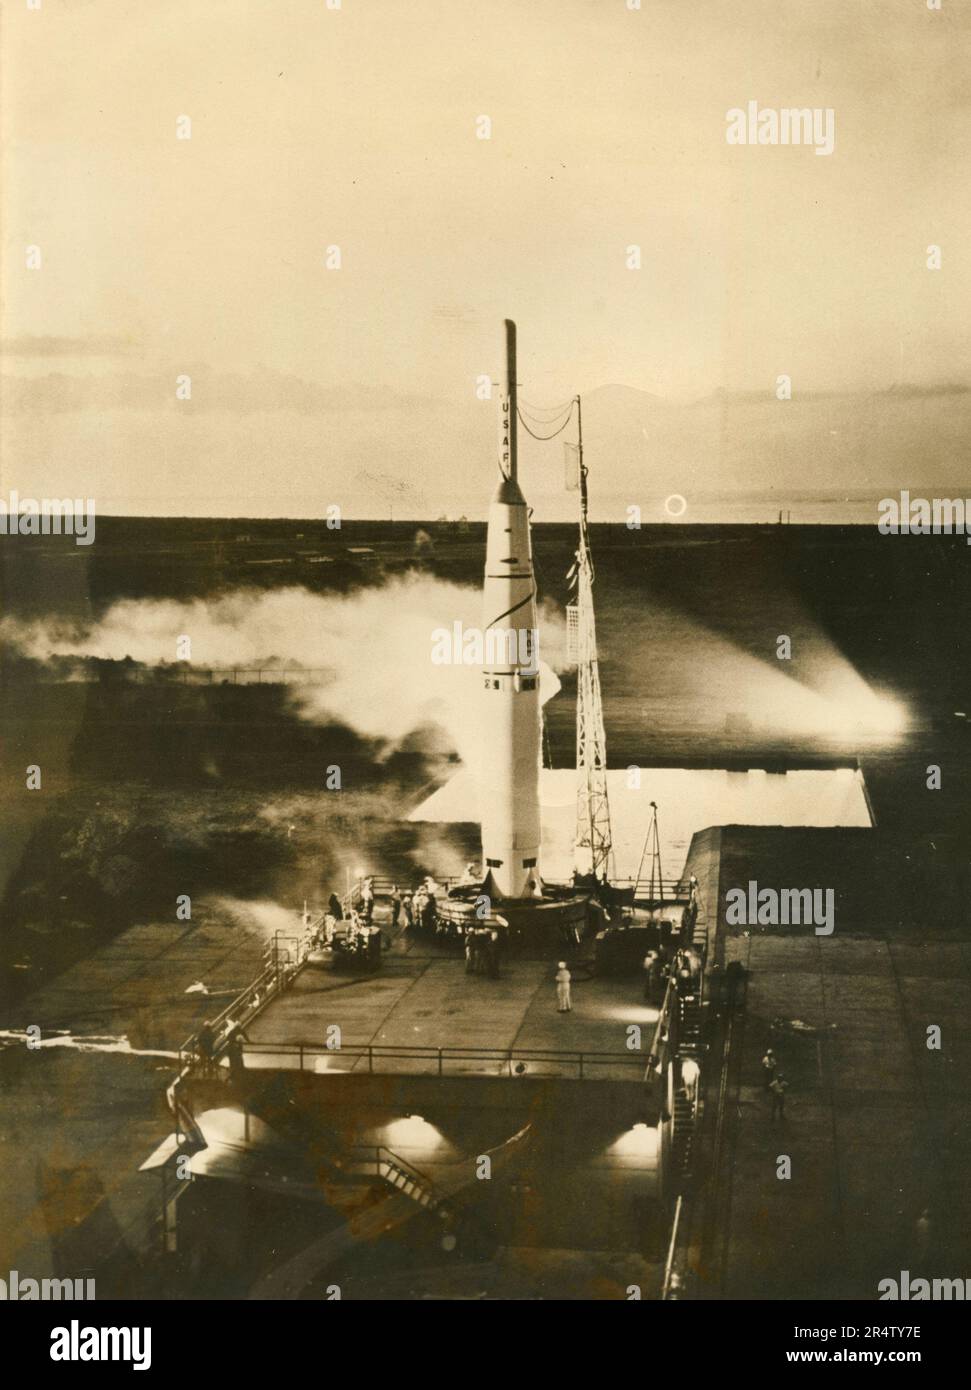 US Air Force expendable launch system and sounding rocket Thor-Able being tested at Cape Canaveral, USA 1958 Stock Photo